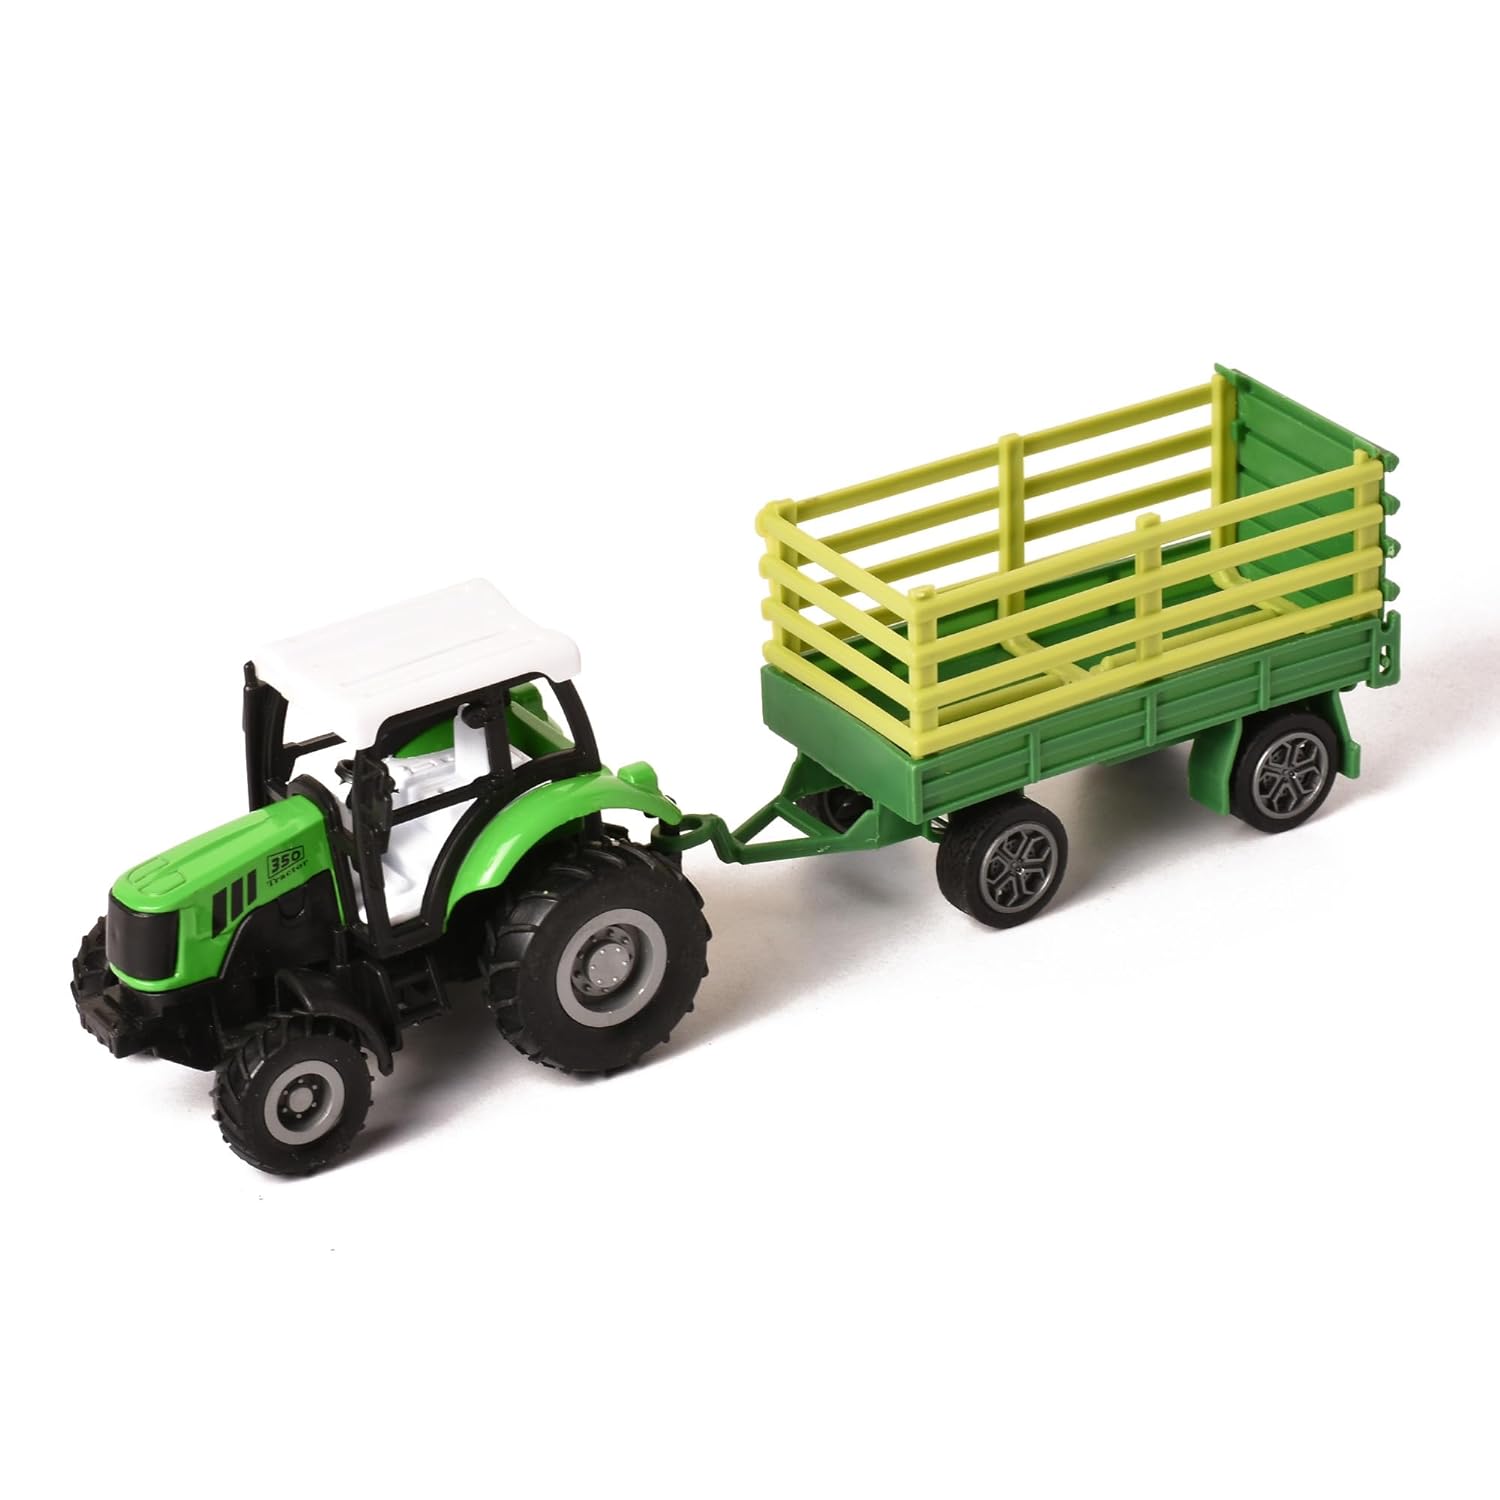 Braintastic Pull Back Inertia Vehicles Farm Tractor with Trolley Truck Agriculture Farm Friction Power Toy for Kids Age 3+ Years Design